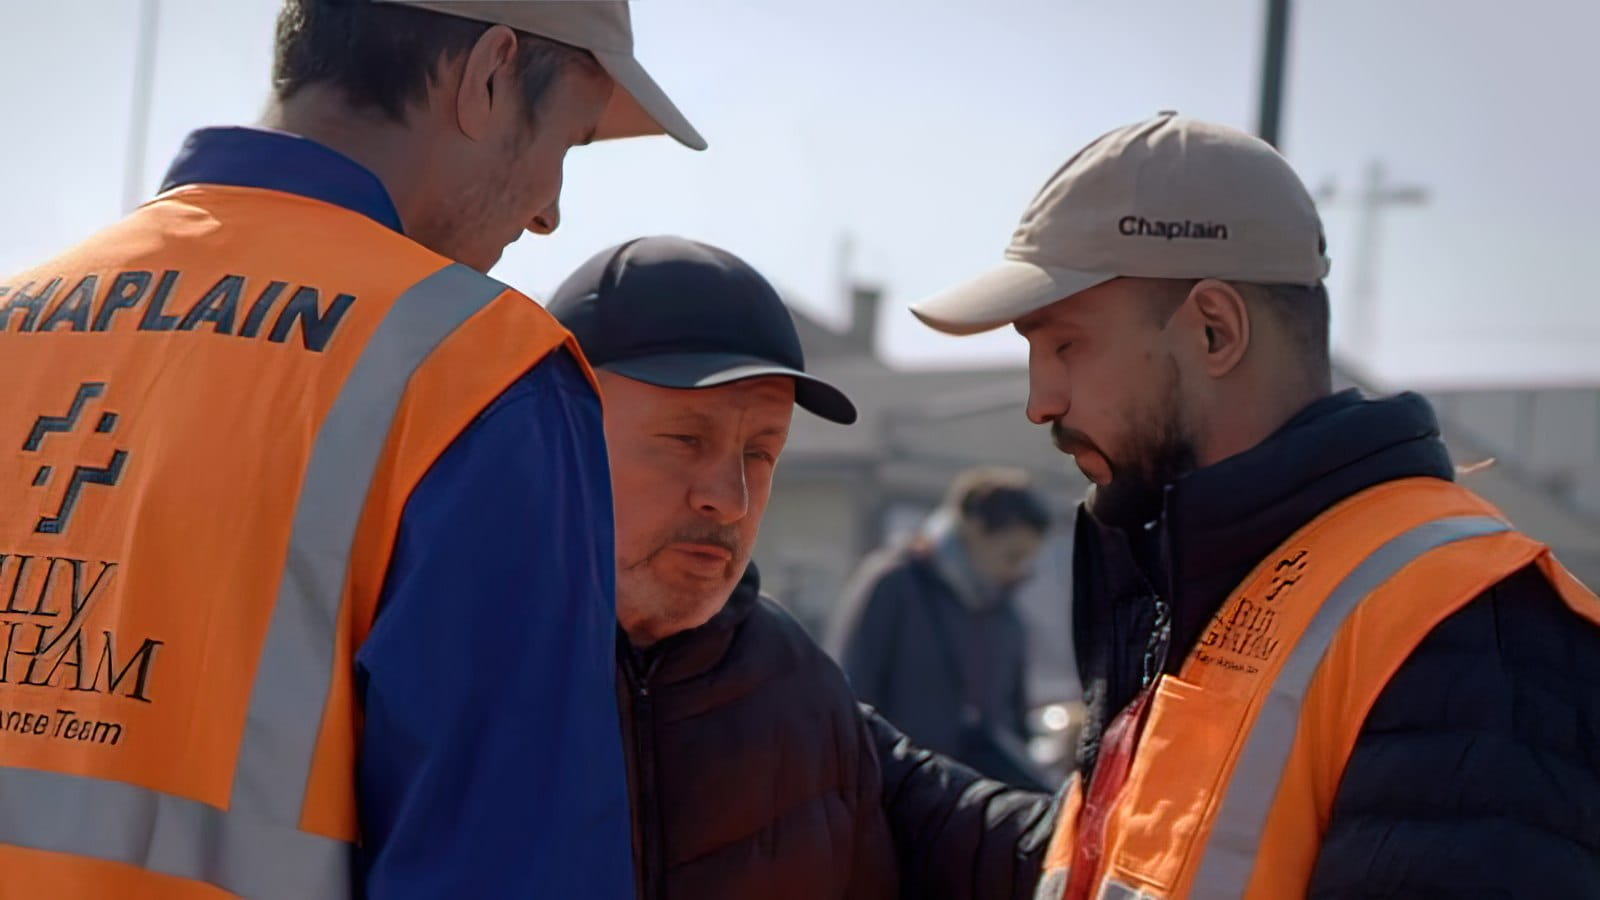 Billy Graham Rapid Response Team chaplains are seeing a growing openness to the Gospel as they minister to thousands throughout Ukraine.